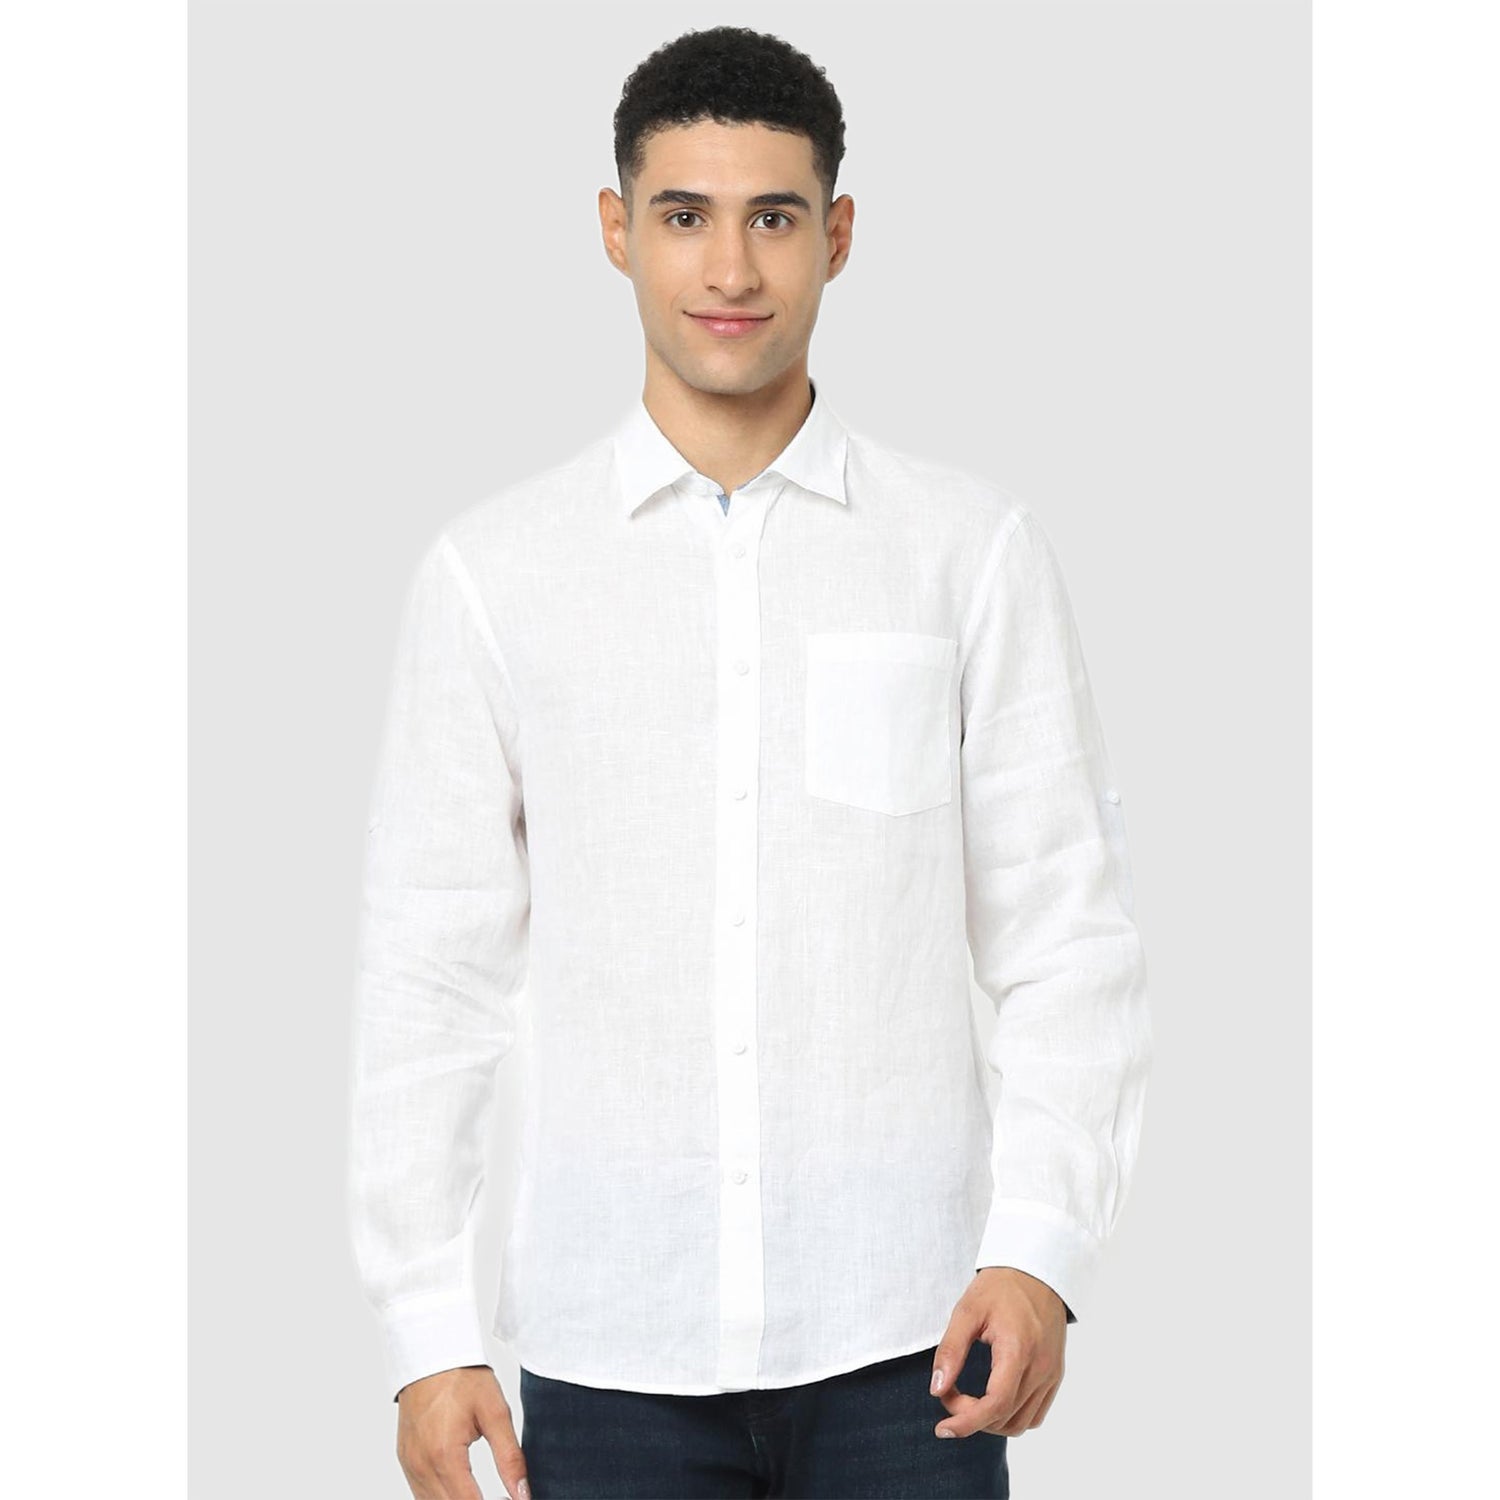 White Solid Classic Regular Fit Casual Linen Shirt (CATALIN)